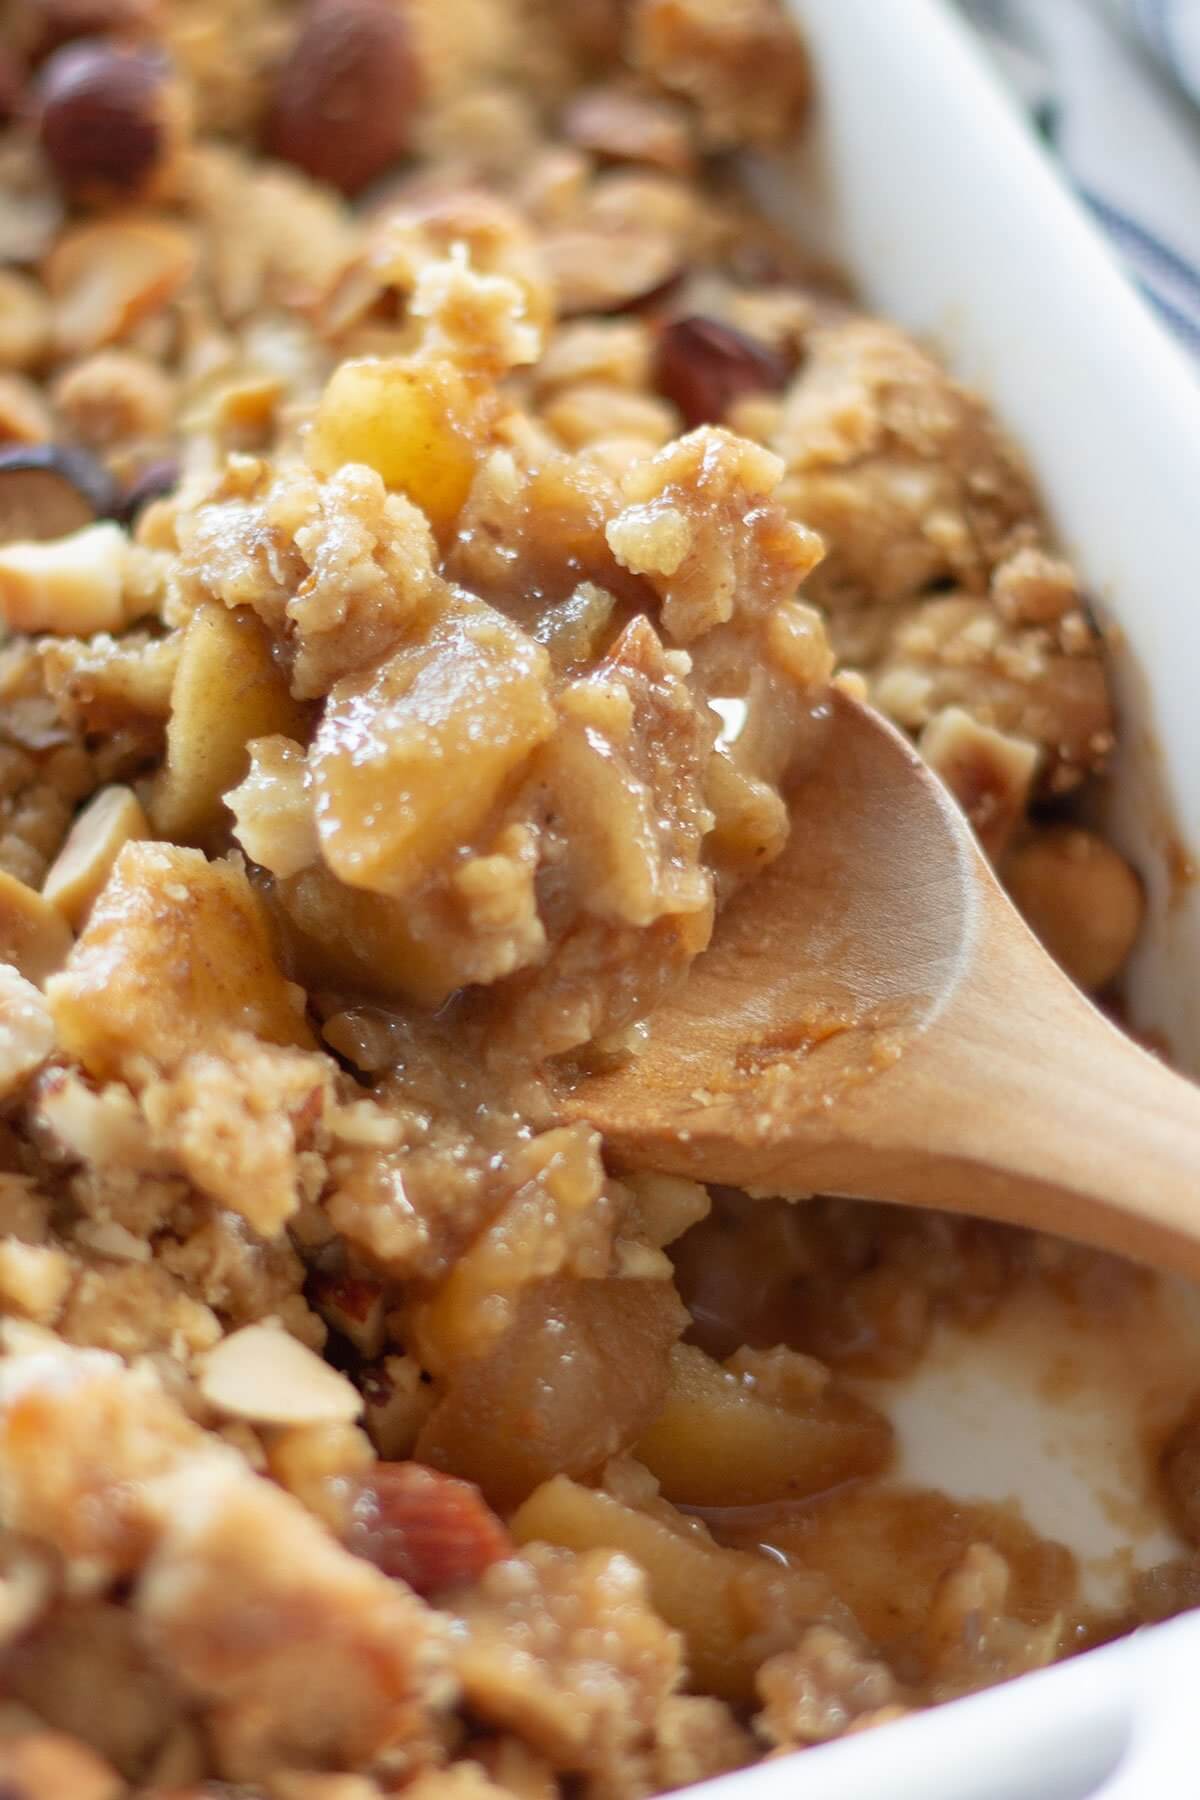 ginger spiced apple crumble on wooden spoon.